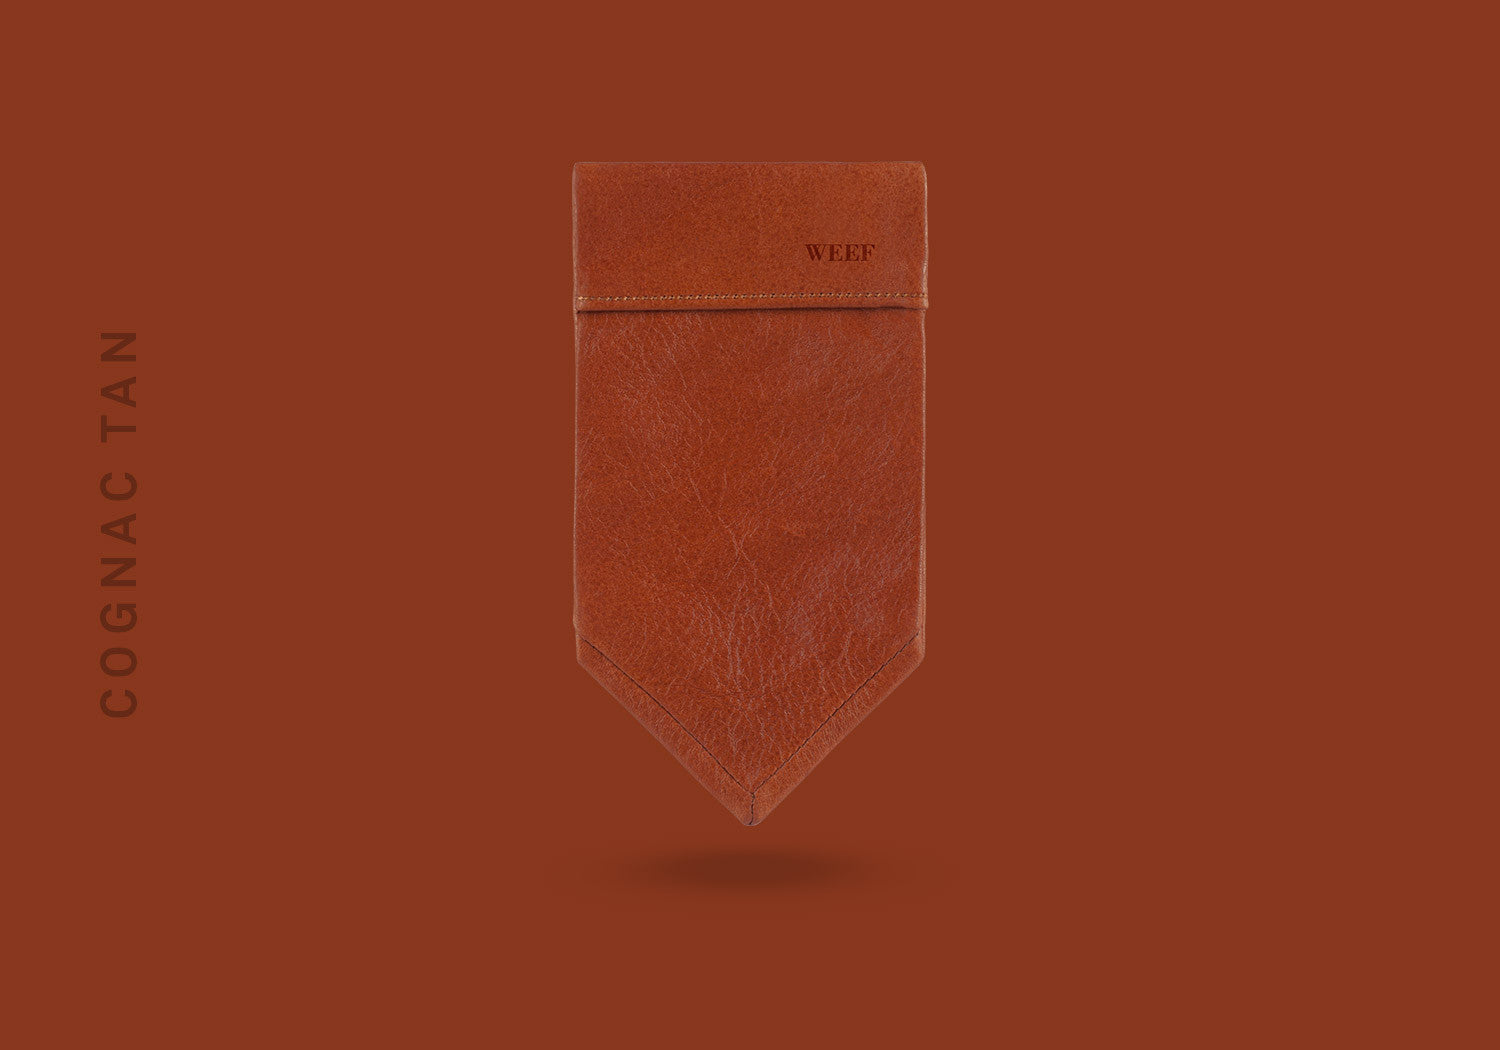 This cognac tan WEEF handmade leather pocket square is a great present or gift idea for dapper and stylish gentlemen for fathers day, valentines day or Christmas.